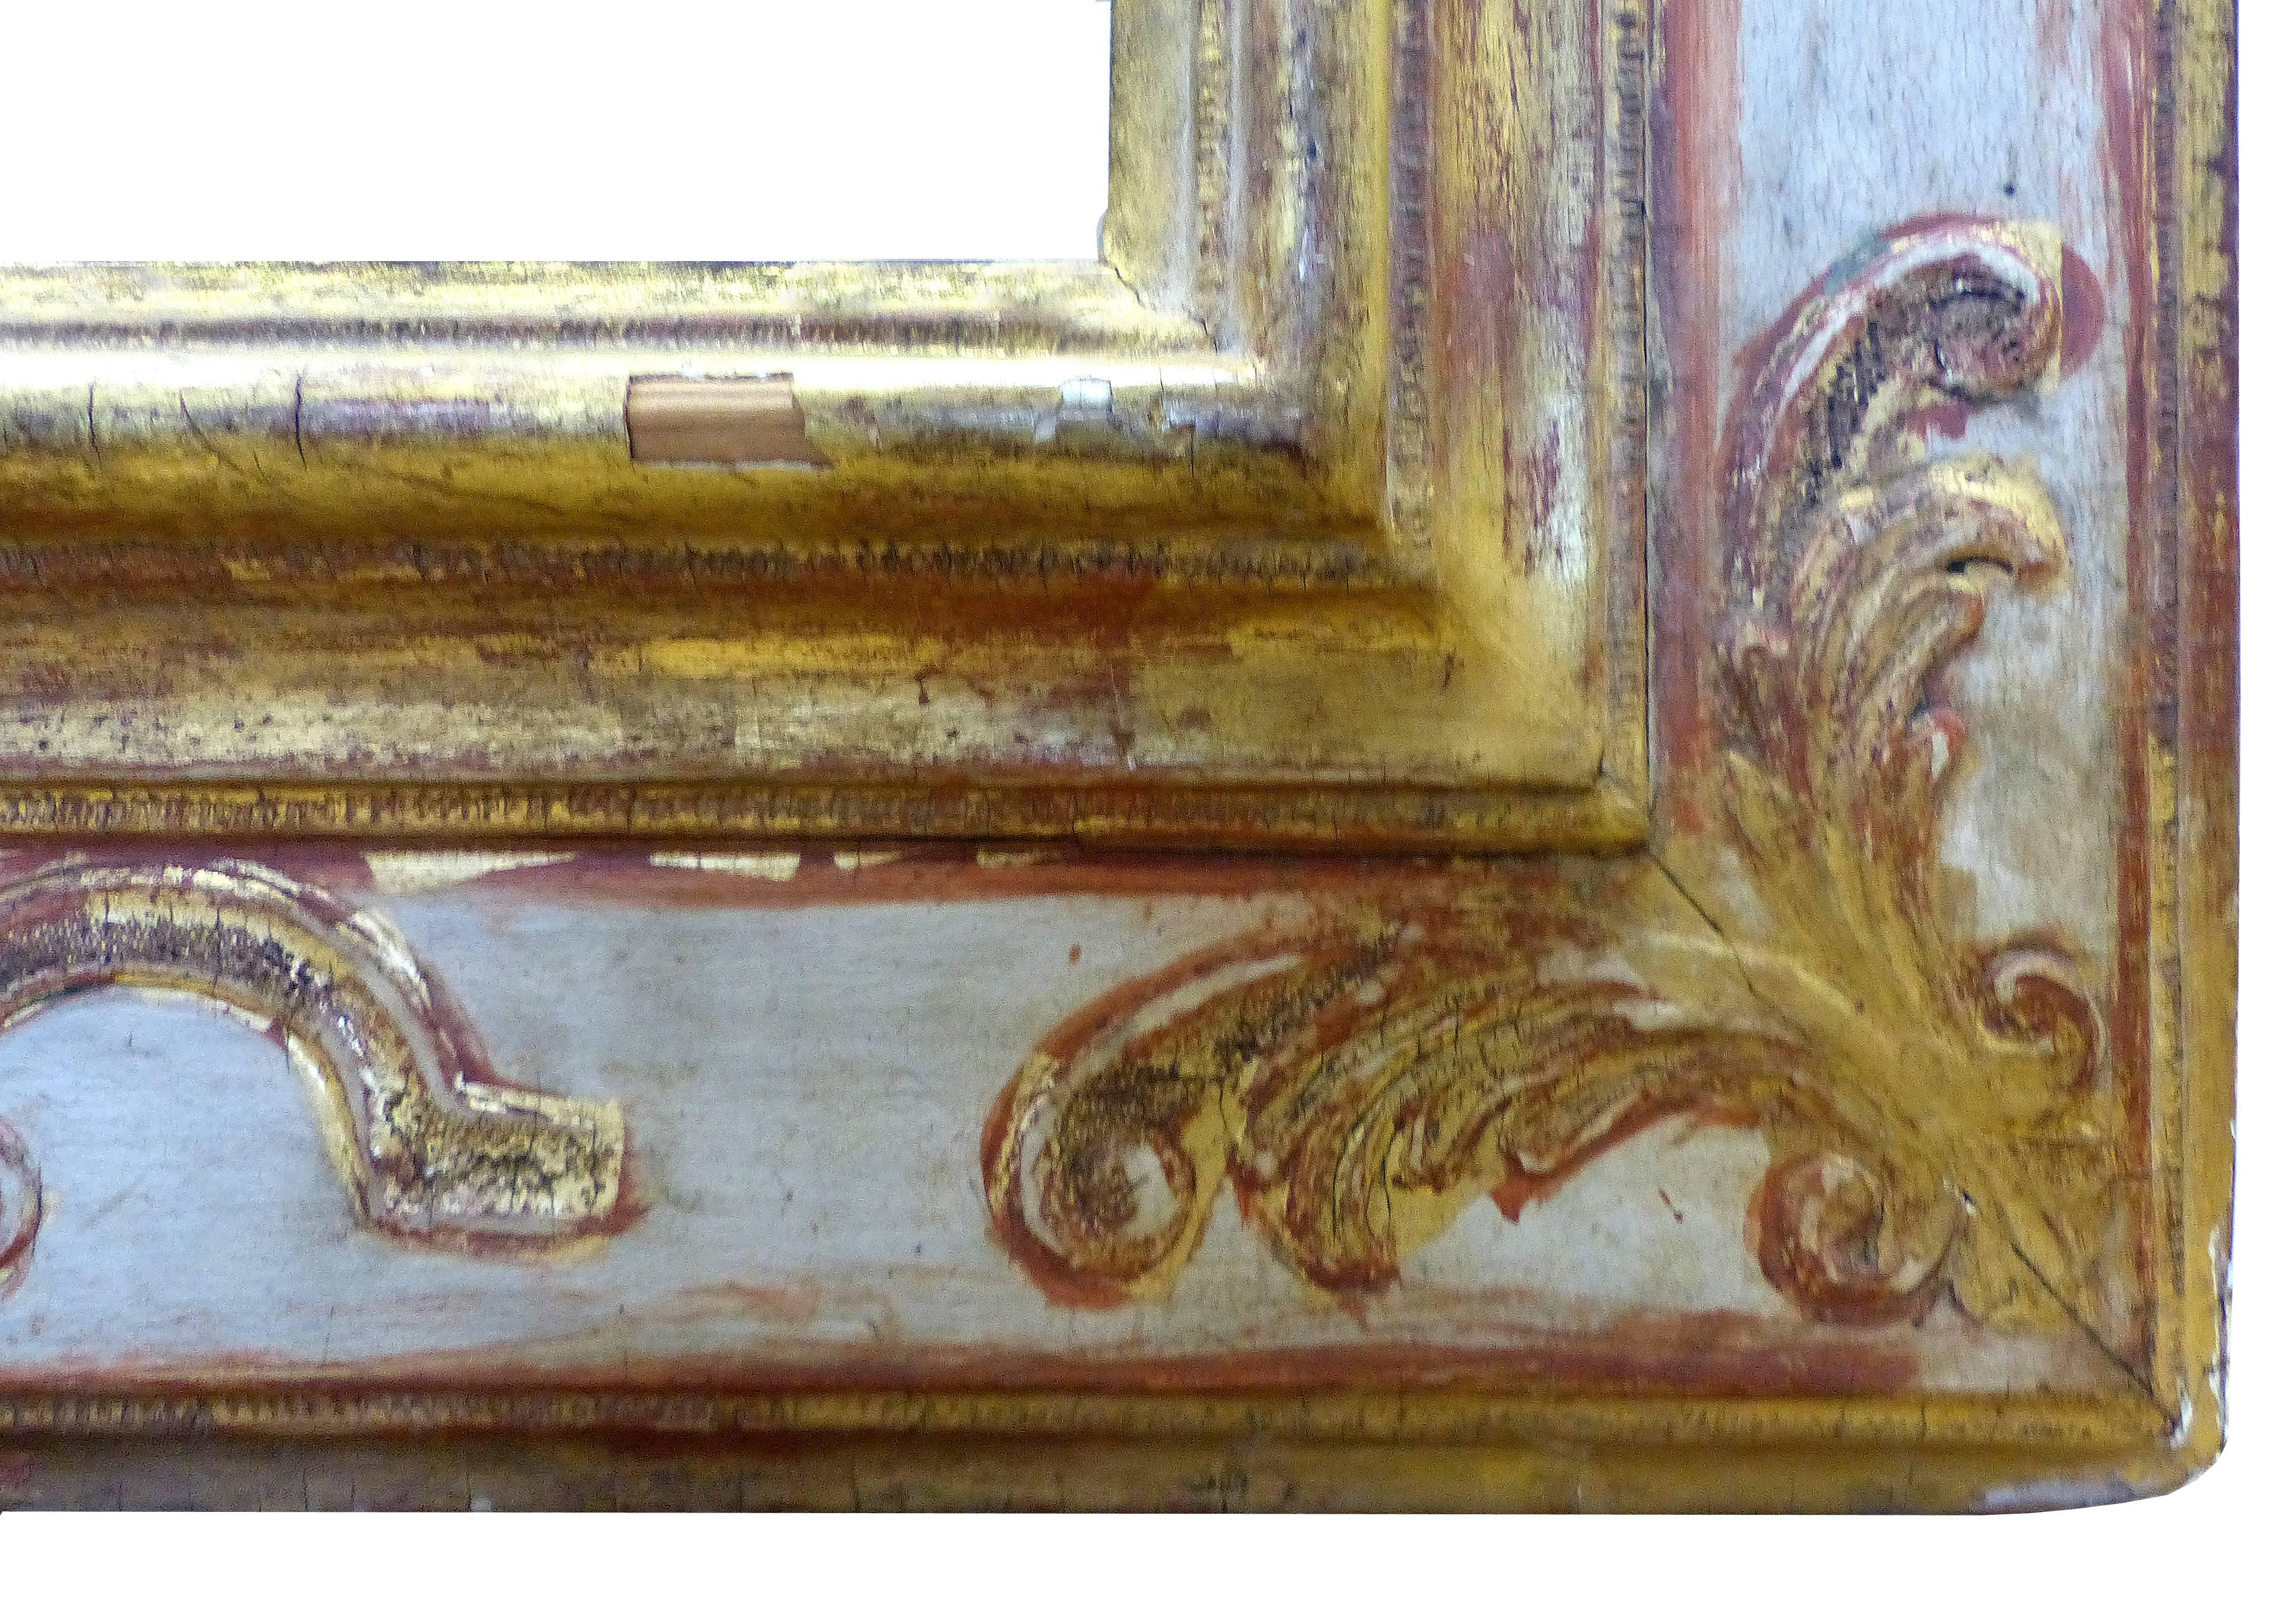 An elegant European 17th century carved giltwood frame from either Spain or Italy. Has achieved an appropriate patina with finish and edge wear commensurate with age. Inside dimensions, 33" x 41"; viewed either vertically or horizontally.